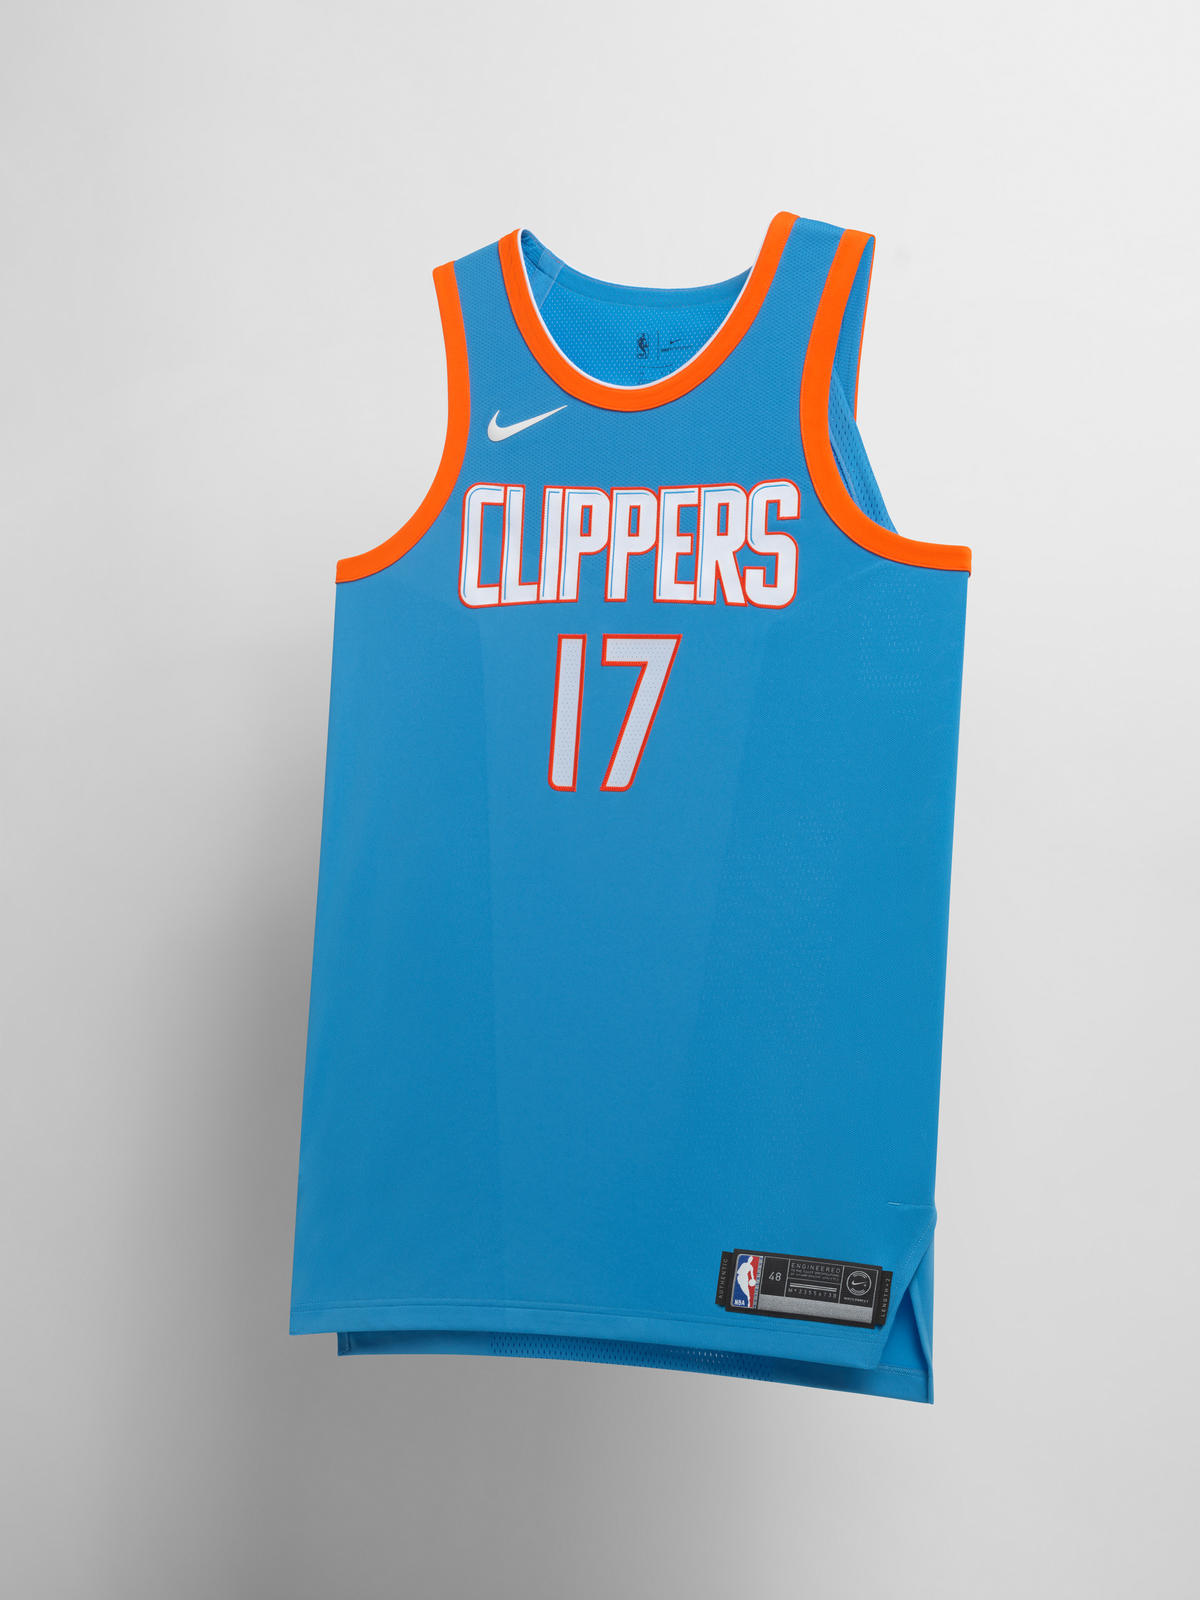 Nike Unveils New NBA City Edition Jerseys - WearTesters1200 x 1600